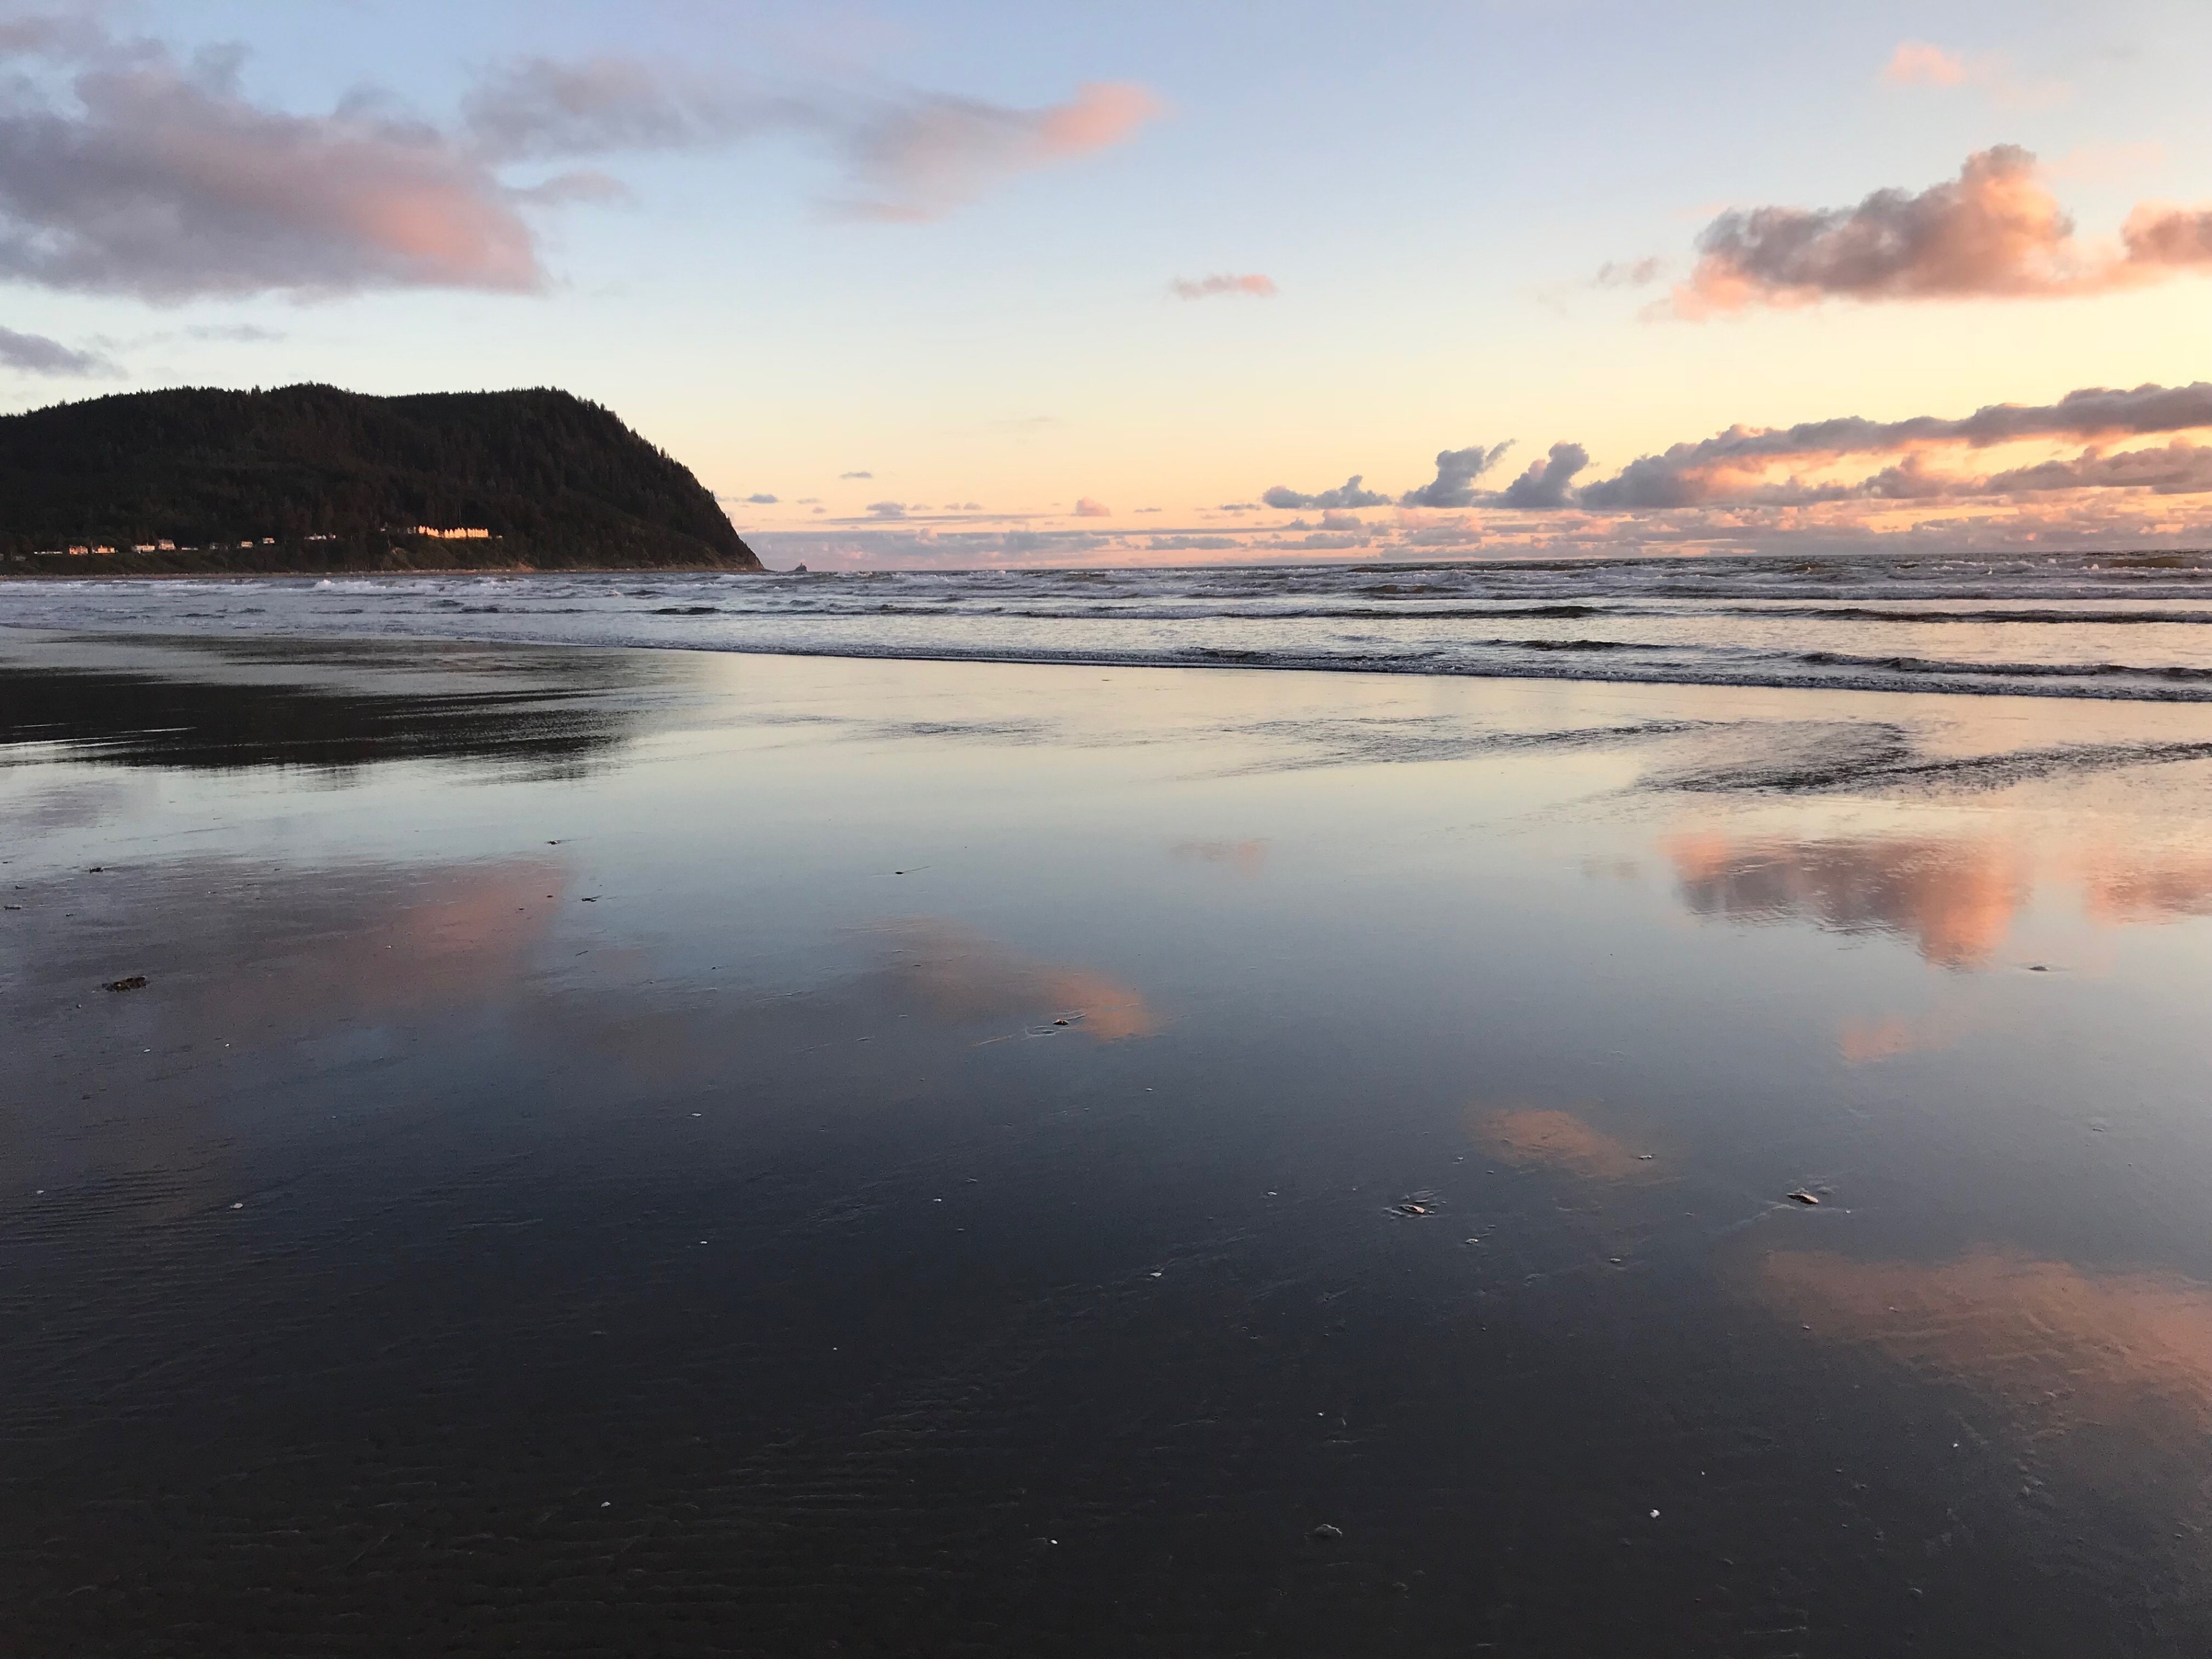 During low tide, the shallow gradient of the beach allows the retreating water to act as a mirror, allowing the peninsula in the distance and the sky to be reflected.

#LifeatExpedia